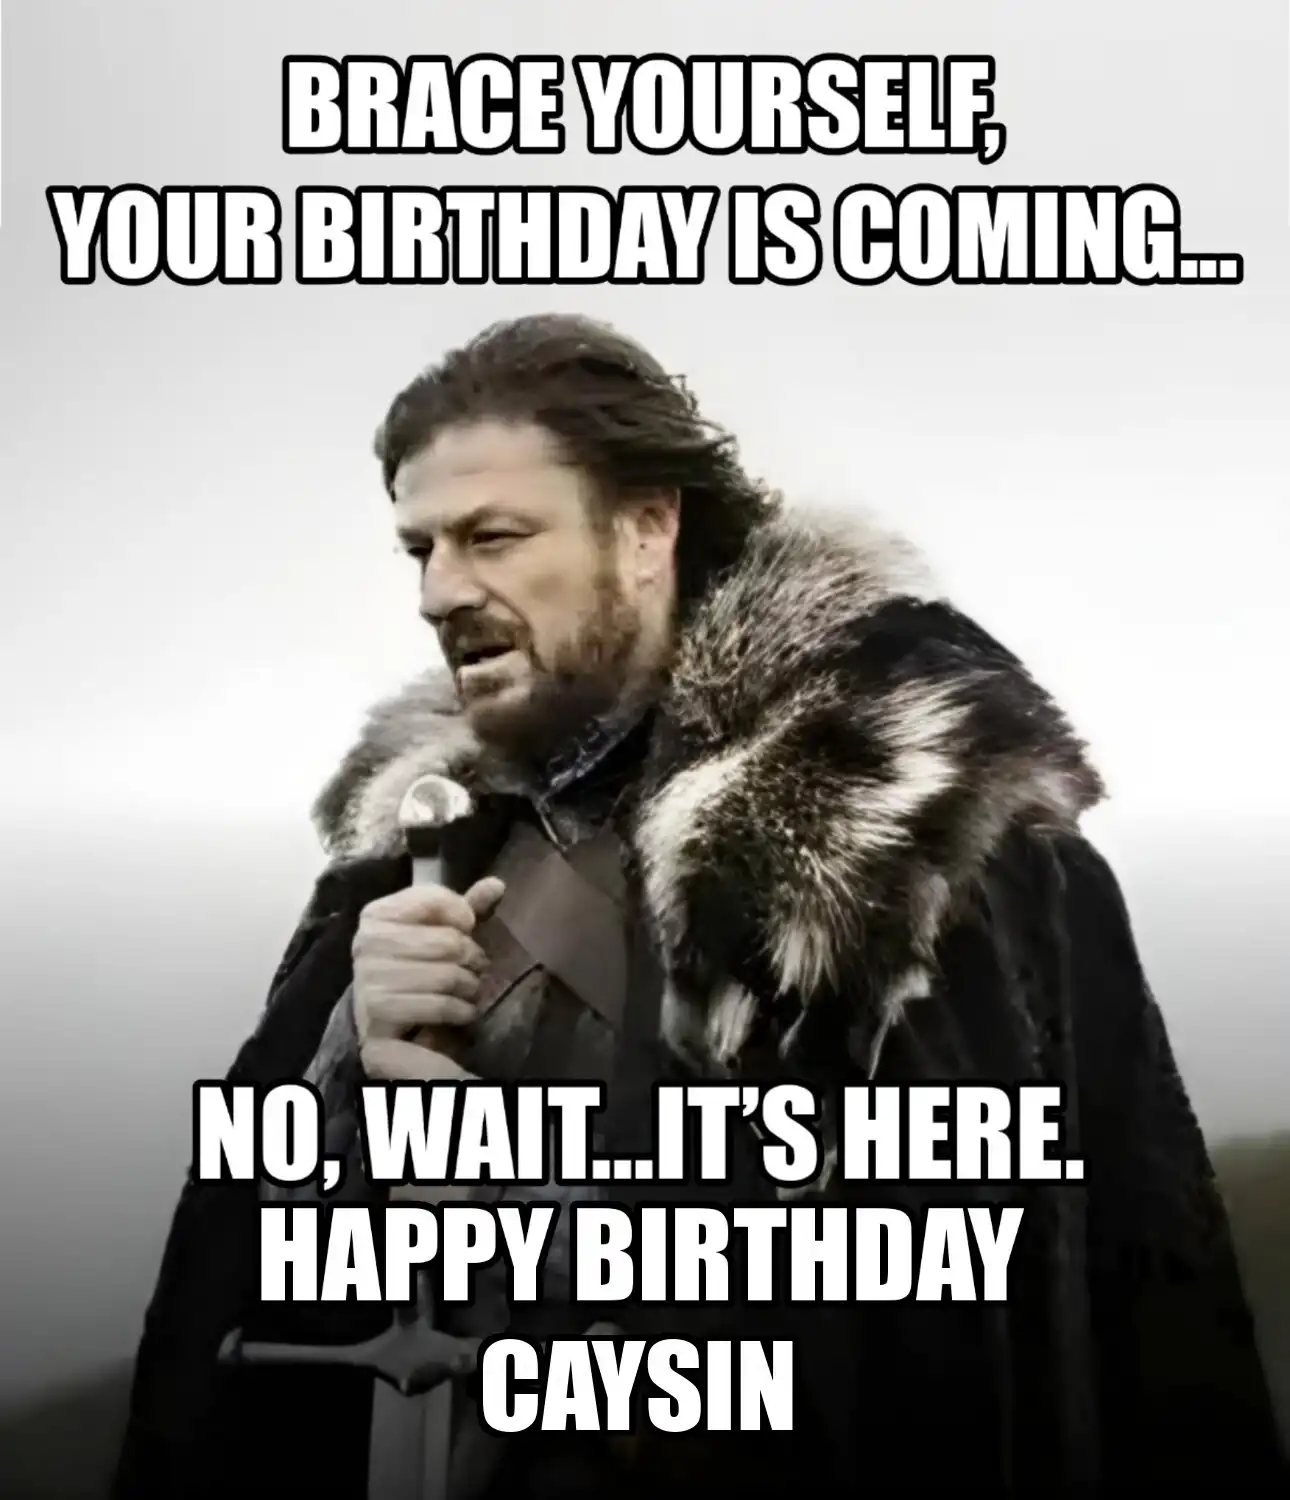 Happy Birthday Caysin Brace Yourself Your Birthday Is Coming Meme